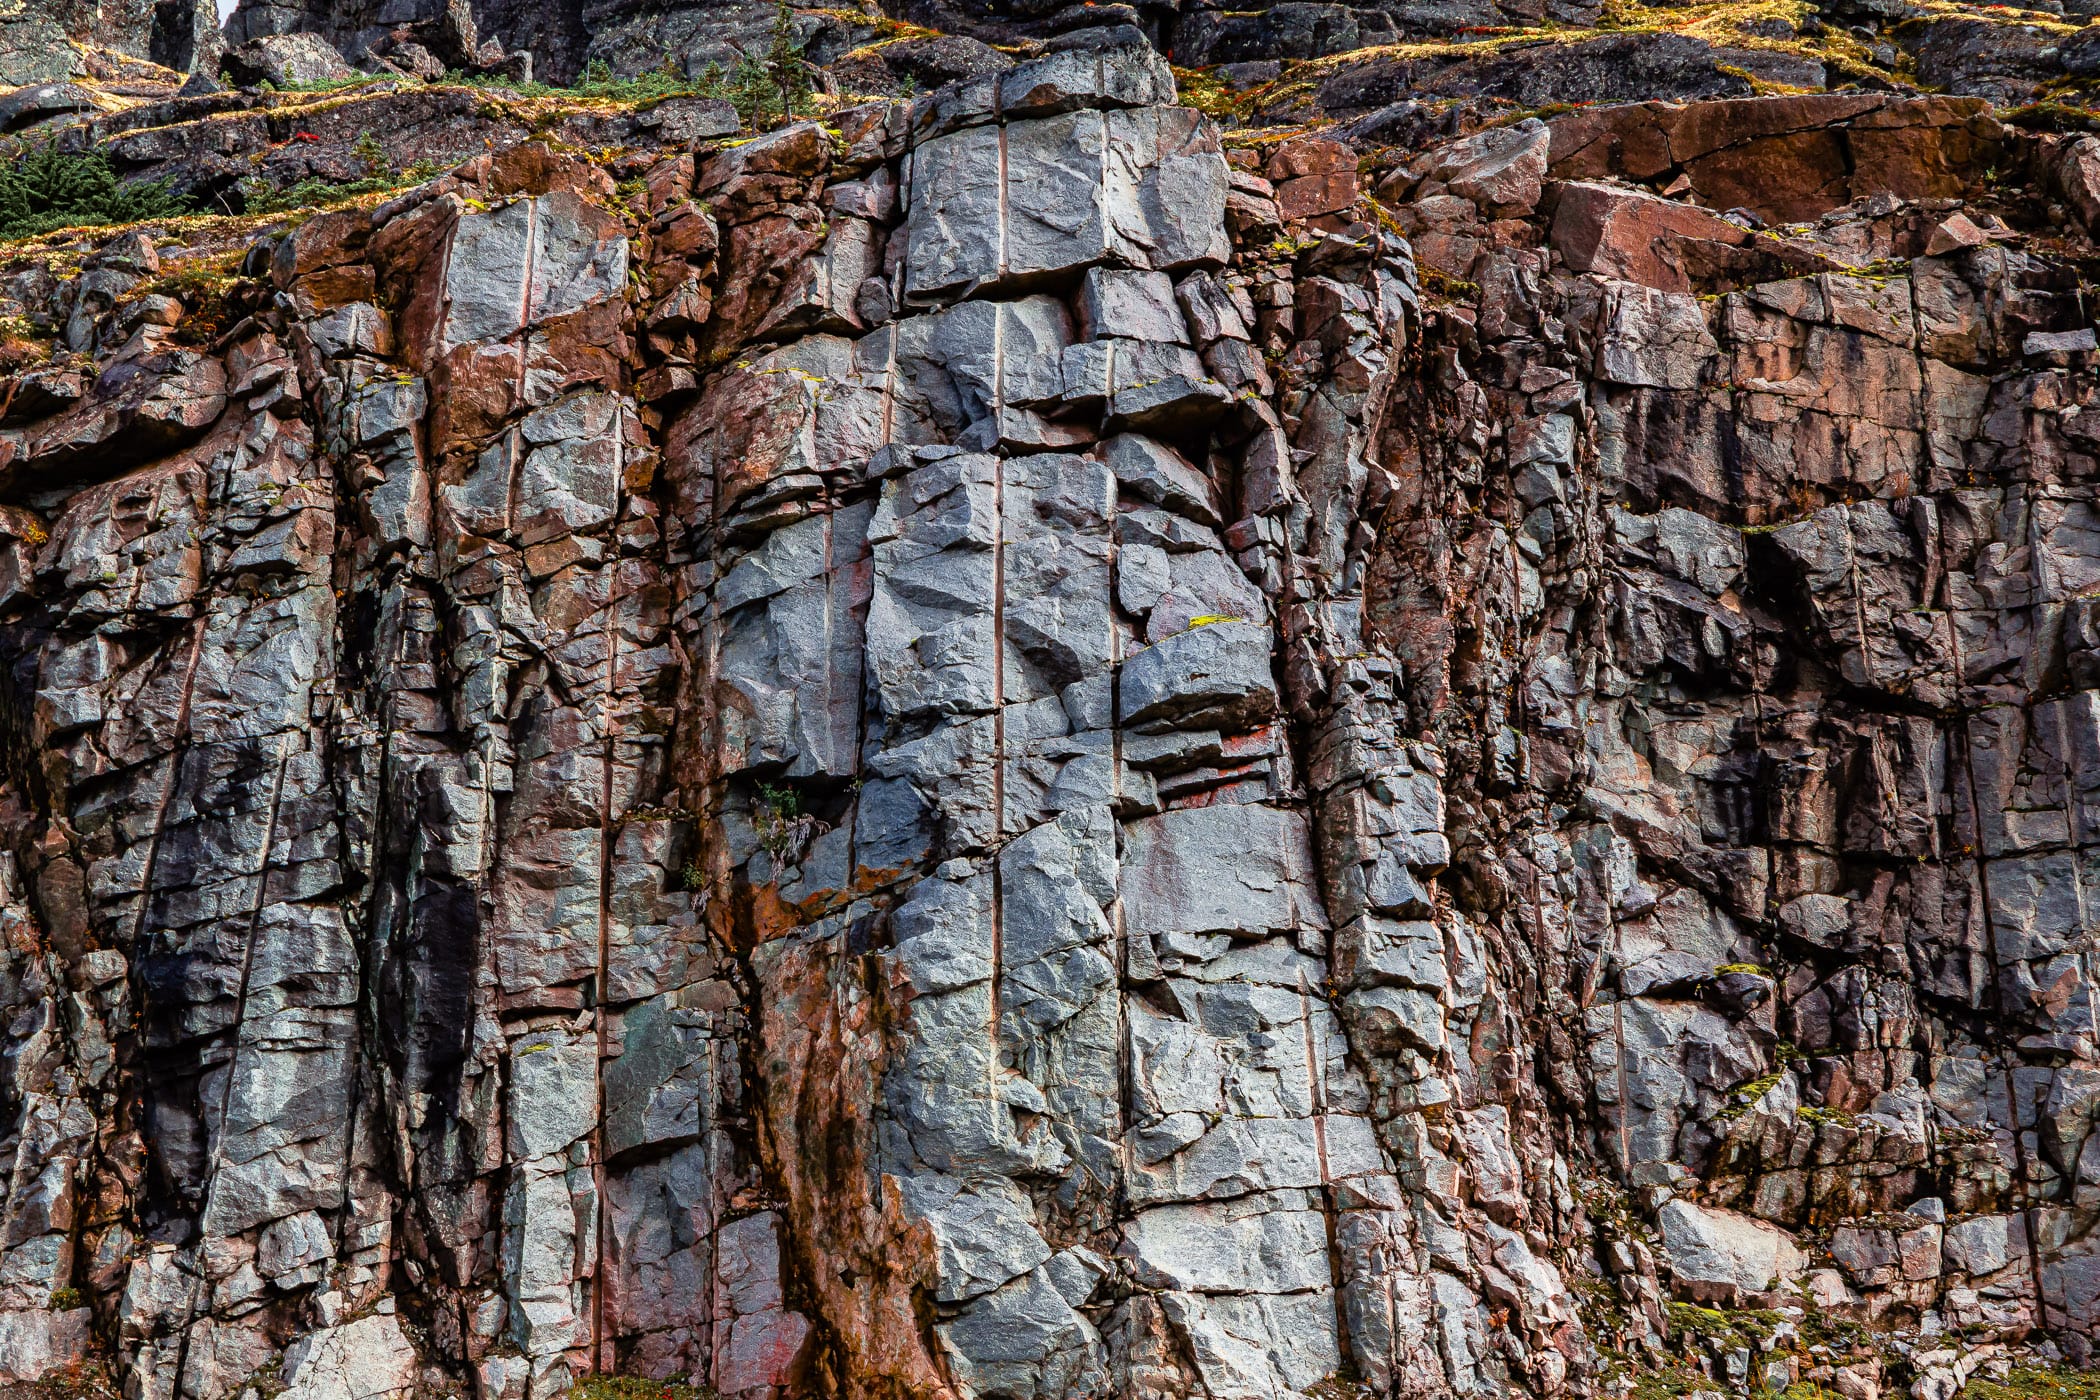 Cracked rocks showing vertical boreholes where explosives were placed to carve the Klondike Highway out of the rugged landscape of Alaska near the border with British Columbia, Canada.